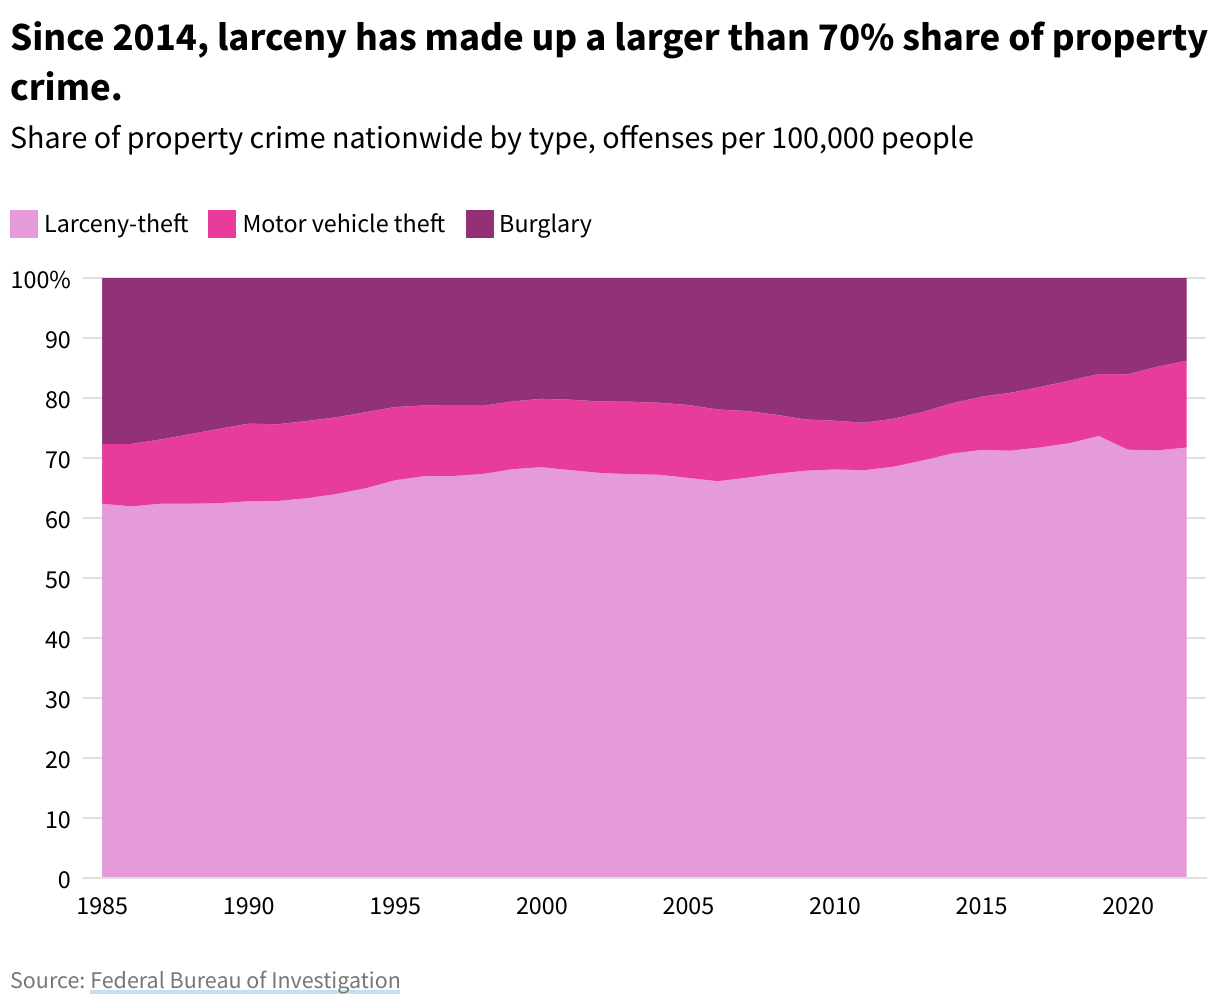 A percentage area chart showing the share of national property crime by type. Since 2014, larceny has made up a larger than 70% share of property crime. 